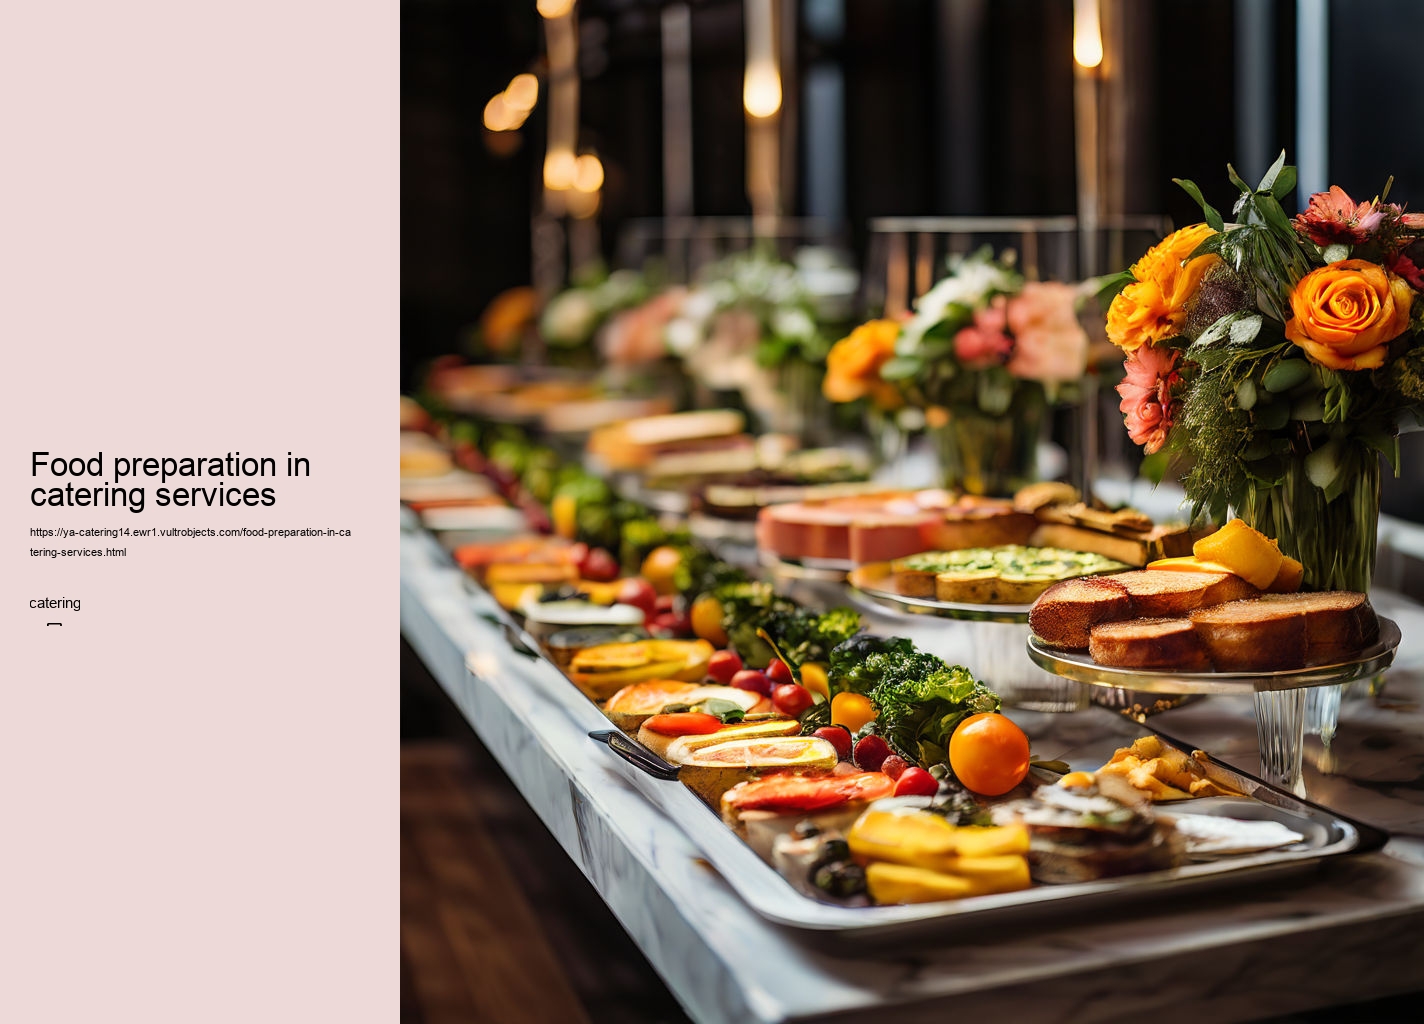 Food preparation in catering services